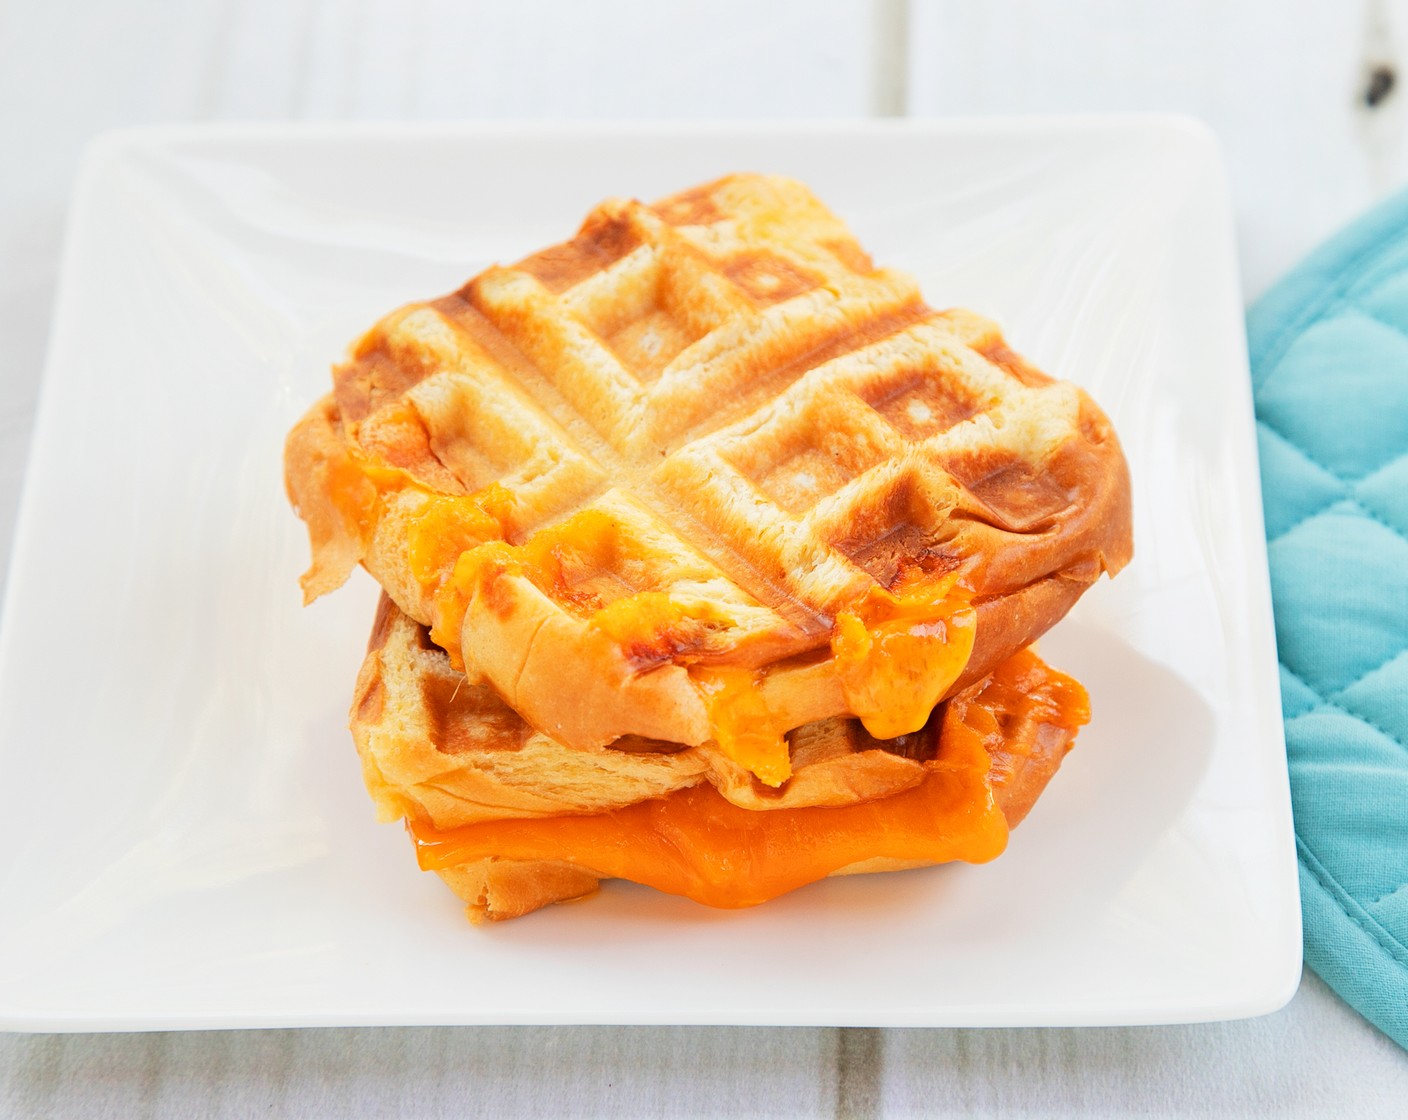 Waffle Iron Grilled Cheese